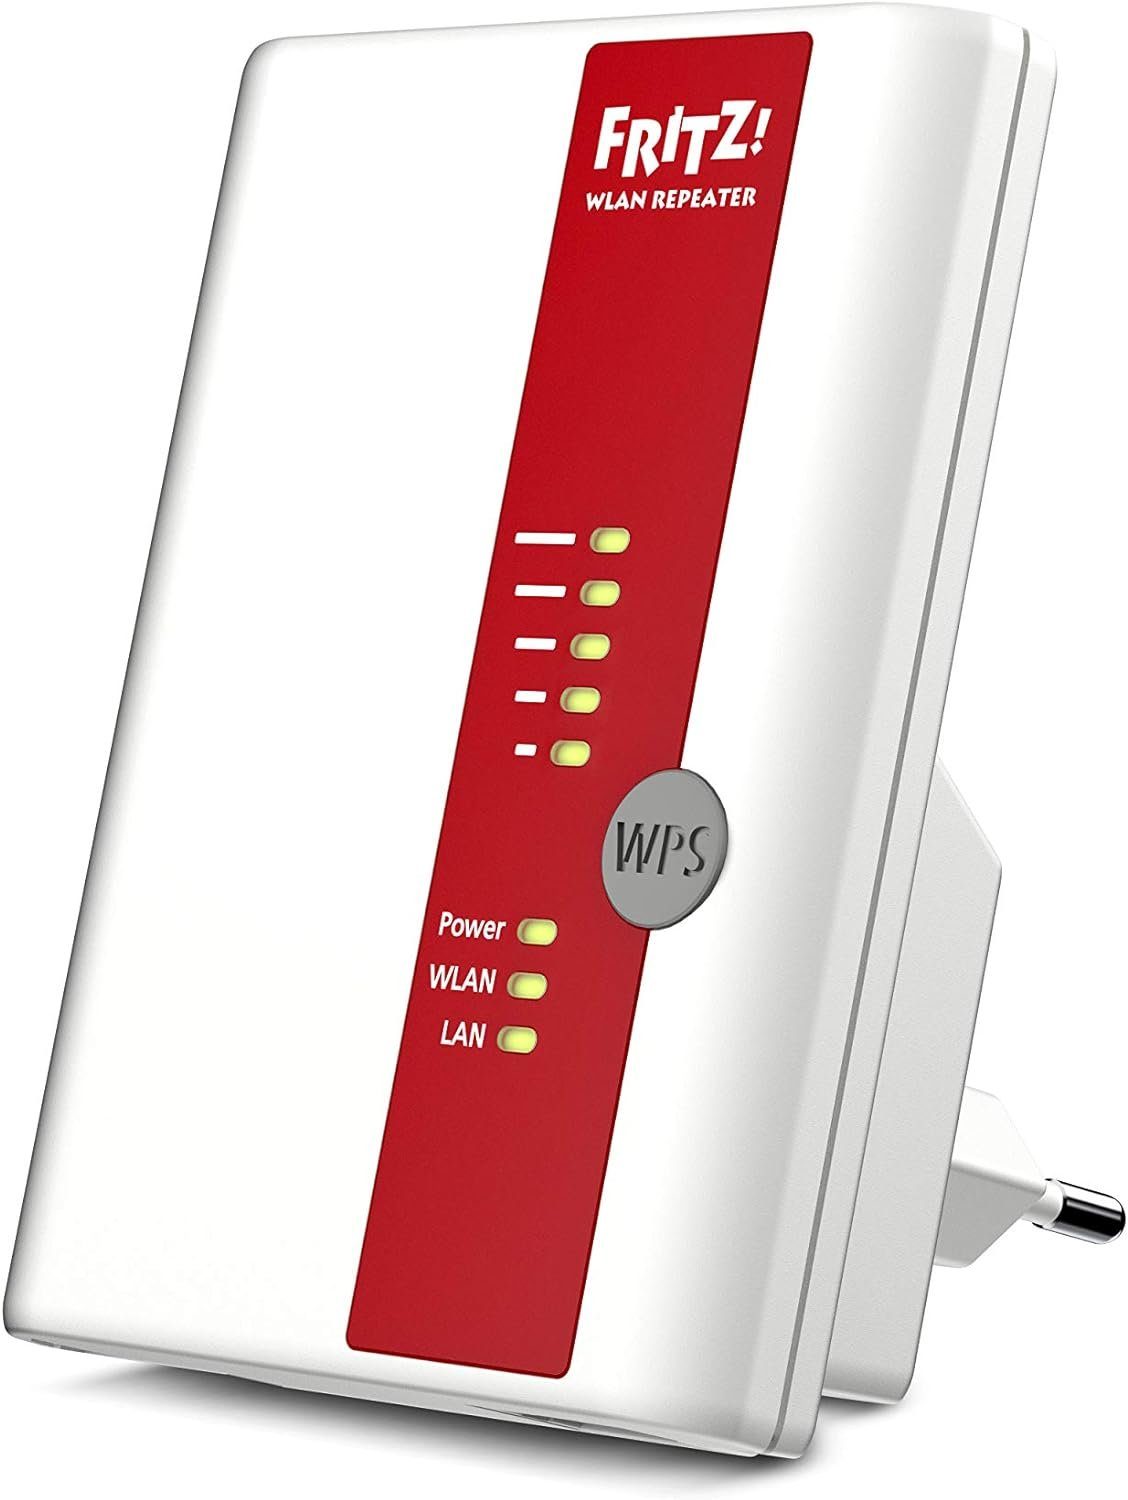 450E REPEATER FRITZ!WLAND Fritz! WLAN-Repeater